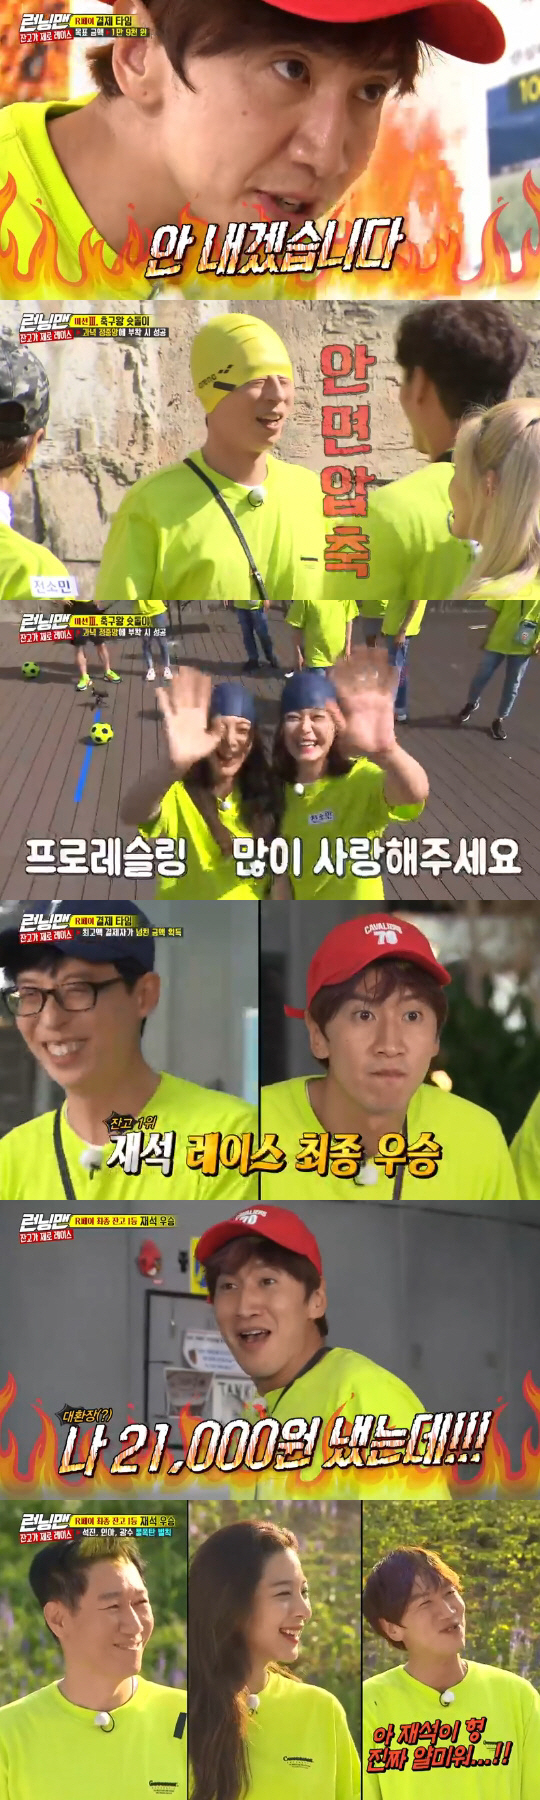 Running Man Yoo Jae-Suk won the final by defeating Lee Kwang-soo by 1,000 won.On SBS Running Man broadcasted on the afternoon of the 23rd, Zango Xero Race was held with Cheongha and Seol Ina appearing as guests.On this day, Race is a Xero Race that can win if you spend money well.Members who received a mission phone with Wang Feifei of 30,000 won will go to a restaurant and pay for food expenses, so they will pay privately with Wang Feifei.However, if the final amount is insufficient after the power payment, the last person in each round mission and the person who paid the least must pay the shortest amount.On the contrary, if the final amount is overflowing, the person who pays the highest amount will acquire all the difference.Kim Jong-kook expressed confidence that he should give it to his conscience.Yoo Jae-Suk then laughed, saying, We fight each other and Kim Jong-kook eats as a fisherman.With a fierce sense of fighting expected, the members visited the first mission site, the Lobster Shell Ribs Sticked Restaurant, where the members competed in a multiple quiz showdown with a team of two.Kim Jong-kook and Yang Se-chan, Cheongha and Seol In-ah, Yoo Jae-Suk and Haha got the right answer and won 1,000 won, and Song Ji-hyo was voted last and paid without food.The members who got the meal ticket finished the meal, and the payment time came.The total payment amount was 25,000 won, and Yoo Jae-Suk was the first to confidently say, I will pay 10,000 won so that you do not have to pay. However, the actual payment amount was 2,000 won.Most of the members paid 2,000 won to avoid losing money, while Seol In-ah paid 5,000 won and Jeon So-min paid 10,000 won.As a result, the total settlement amount exceeded 4,000 won, and the additional 4,000 won was paid to Jeon So-min, who paid the most.Still, Jeon So-min lost 6,000 won. The best beneficiary was Song Ji-hyo.Song Ji-hyo paid 0 won to watch the trend as much as possible and did not lose a penny even though it was last.The second mission site is a beef sashimi steamed restaurant, where members have started to acquire a meal ticket through a game.Lee Kwang-soo, Kim Jong-kook, Cheongha and Yoo Jae-Suk won the meal ticket through Game.Cheung, who even won the last spot, chose Yang Se-chan as the last.It was time for the members to pay after dinner again. The total payment was 19,000 won, which is cheaper than the first.Haha and Lee Kwang-soo, who expected the settlement to overflow, paid 0 won, and Song Ji-hyo and Seol In-ah, who aimed for excess amount as the first settlement amount, paid 10,000 won each.As a result, 29,000 won, which exceeded 10,000 won, was collected, and Song Ji-hyo and Seol In-ah, who became the first settlement, lost 5,000 won each.The members arrived at the final mission site for the last mission to the end.The final mission is to succeed if you kick the ball toward the target and attach it to the passing target in the center of the center. If it is attached to the penalty target, you will be punished by the person in the order before you (?)Mission. But the members kicked the ball stretching toward the penalty target, not the passing target.The members were punished for wearing unusual hats and color spray dyeing, and they completed the visuals of the past and laughed.Yoo Jae-Suk, who won the championship at the end of twists and turns, finished the meal with Song Ji-hyo and Jeon So-min, and it was the last payment time.Lee Kwang-soo, who had paid 0 won earlier, was in charge of all 21,000 won in all assets in order to win the final.However, Yoo Jae-Suk, who was 1,000 won more than Lee Kwang-soo, also made an All In strategy, and Yoo Jae-Suk won the final championship by 1,000 won.Lee Kwang-soo, who paid all the property, was automatically penalized with a balance of 0 won, and Seol In-ah, who made a big payment every round, was penalized with the last balance except Lee Kwang-soo.Seol In-ah pointed to Ji Suk-jin as a companion penalty, while Lee Kwang-soo, Seol In-ah and Ji Suk-jin performed water bomb penalties side by side.